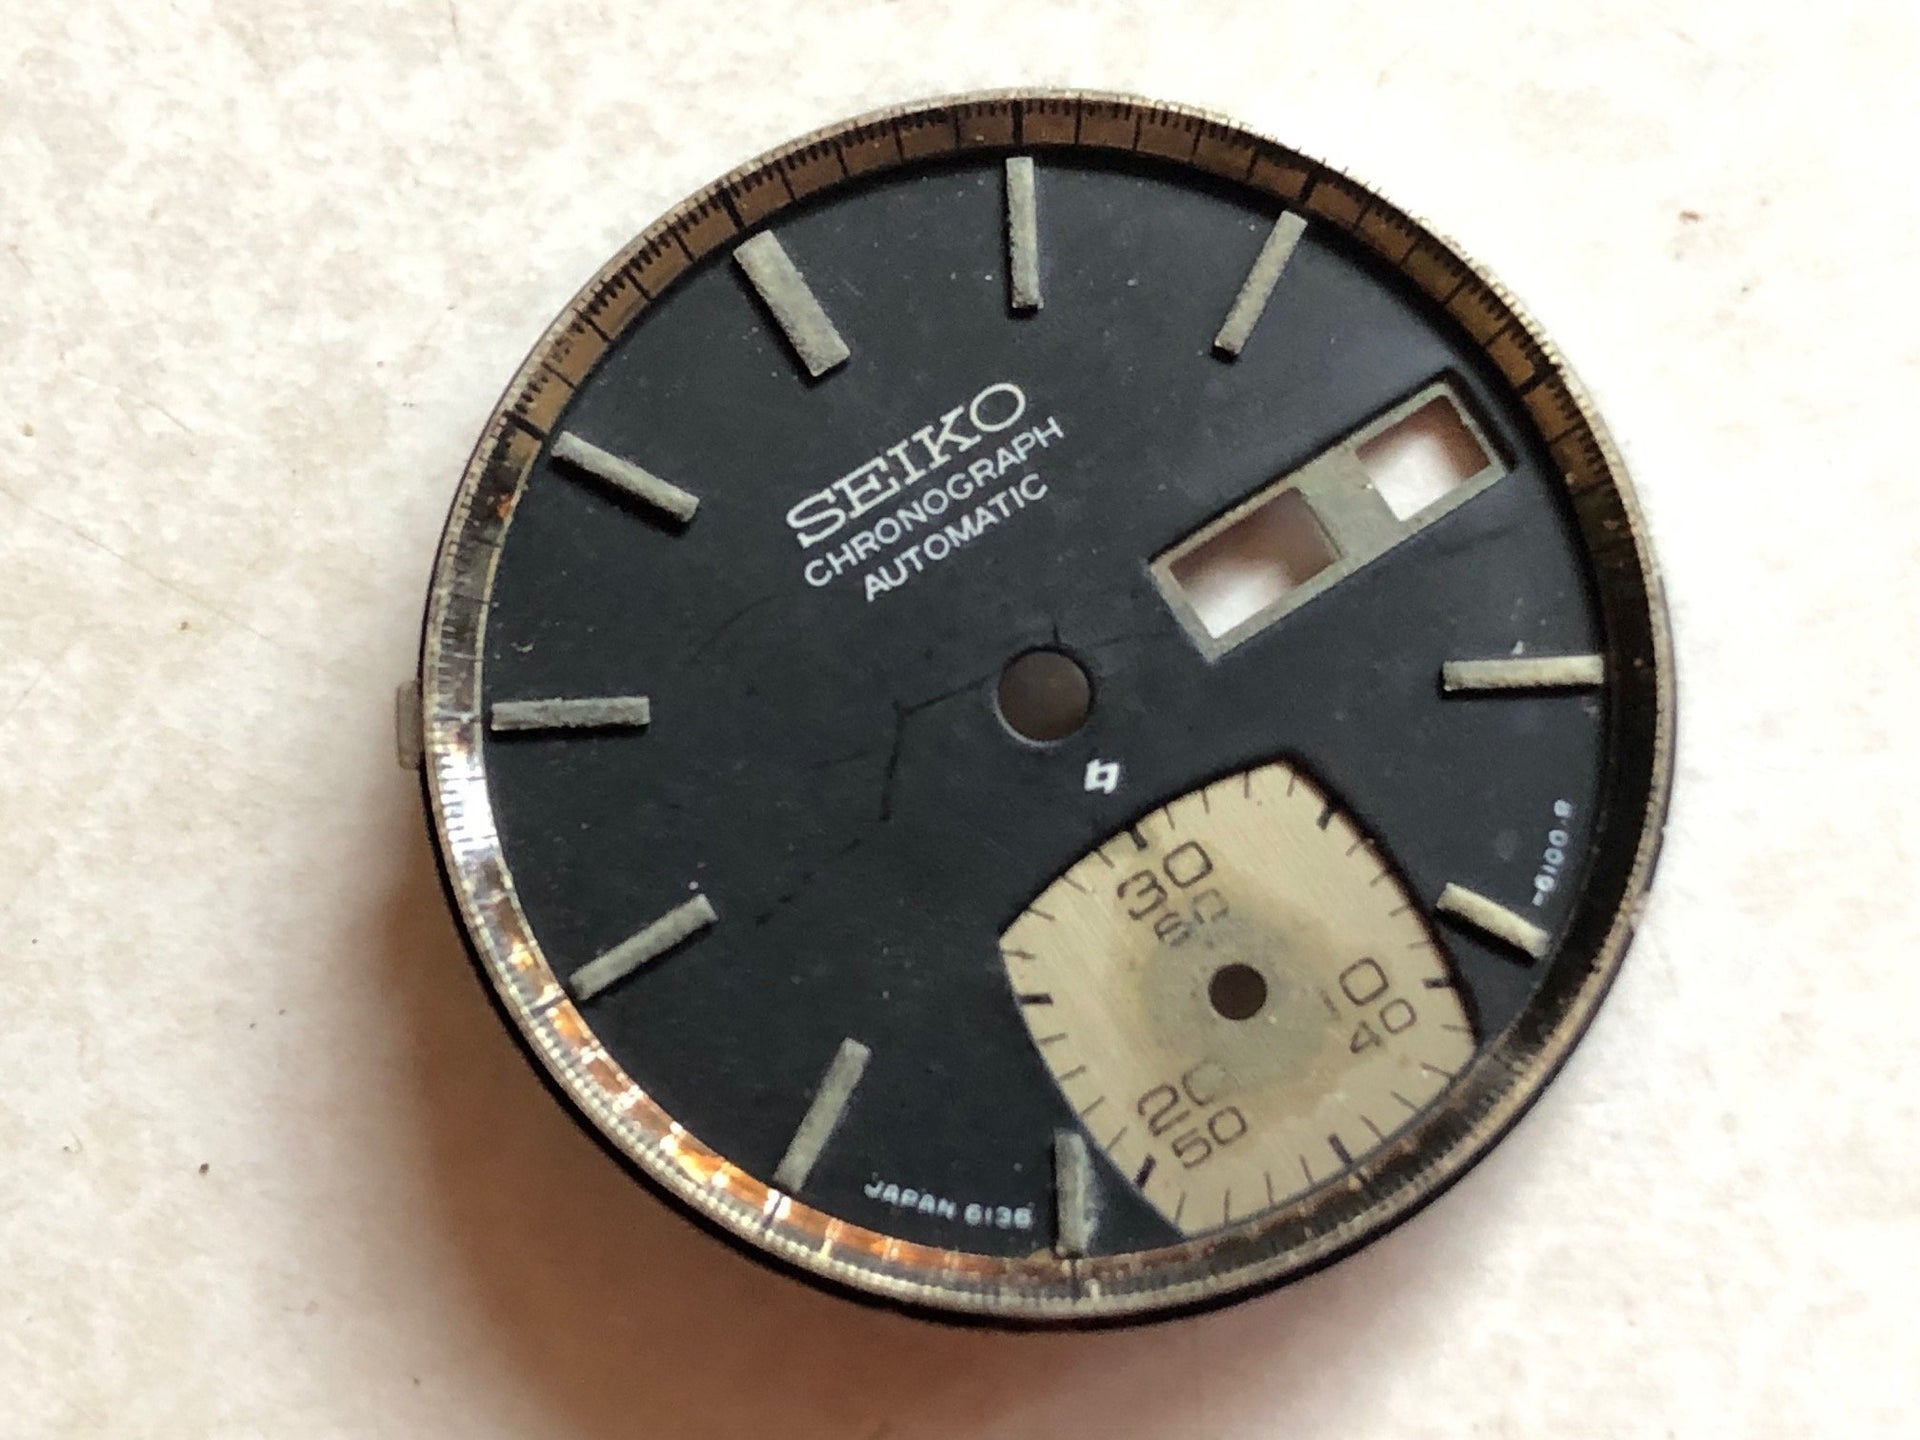 Seiko 6139-6040 Dial, is it real? | The Watch Site